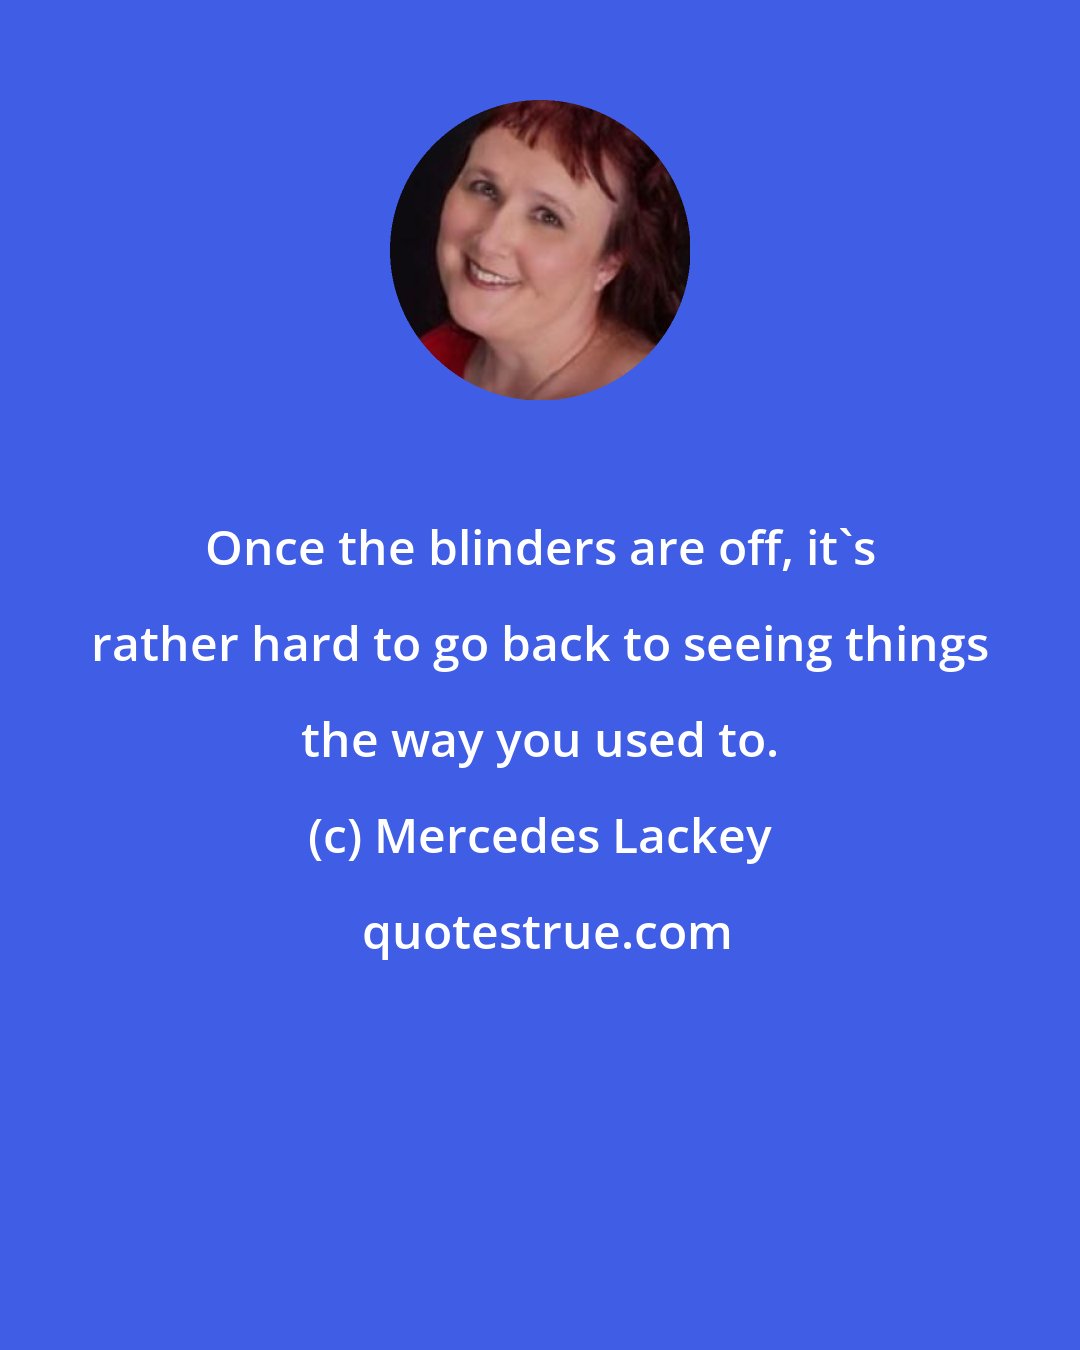 Mercedes Lackey: Once the blinders are off, it's rather hard to go back to seeing things the way you used to.